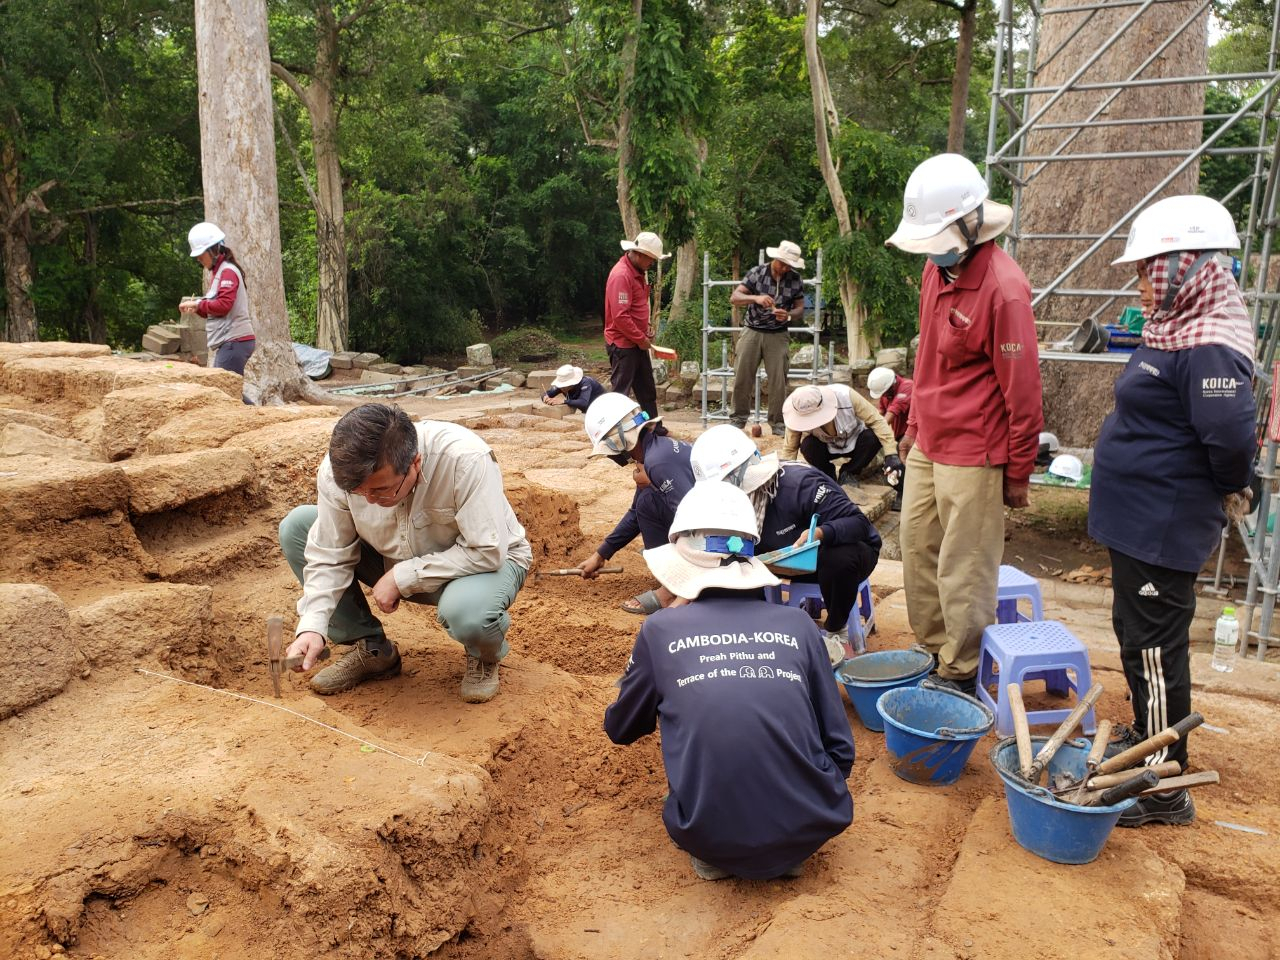 Field researchers work on site at South Korea's official development assistance project in the Preah Pithu Temple Group in Cambodia's Angkor Archaeological Park, in May. (KCHF)